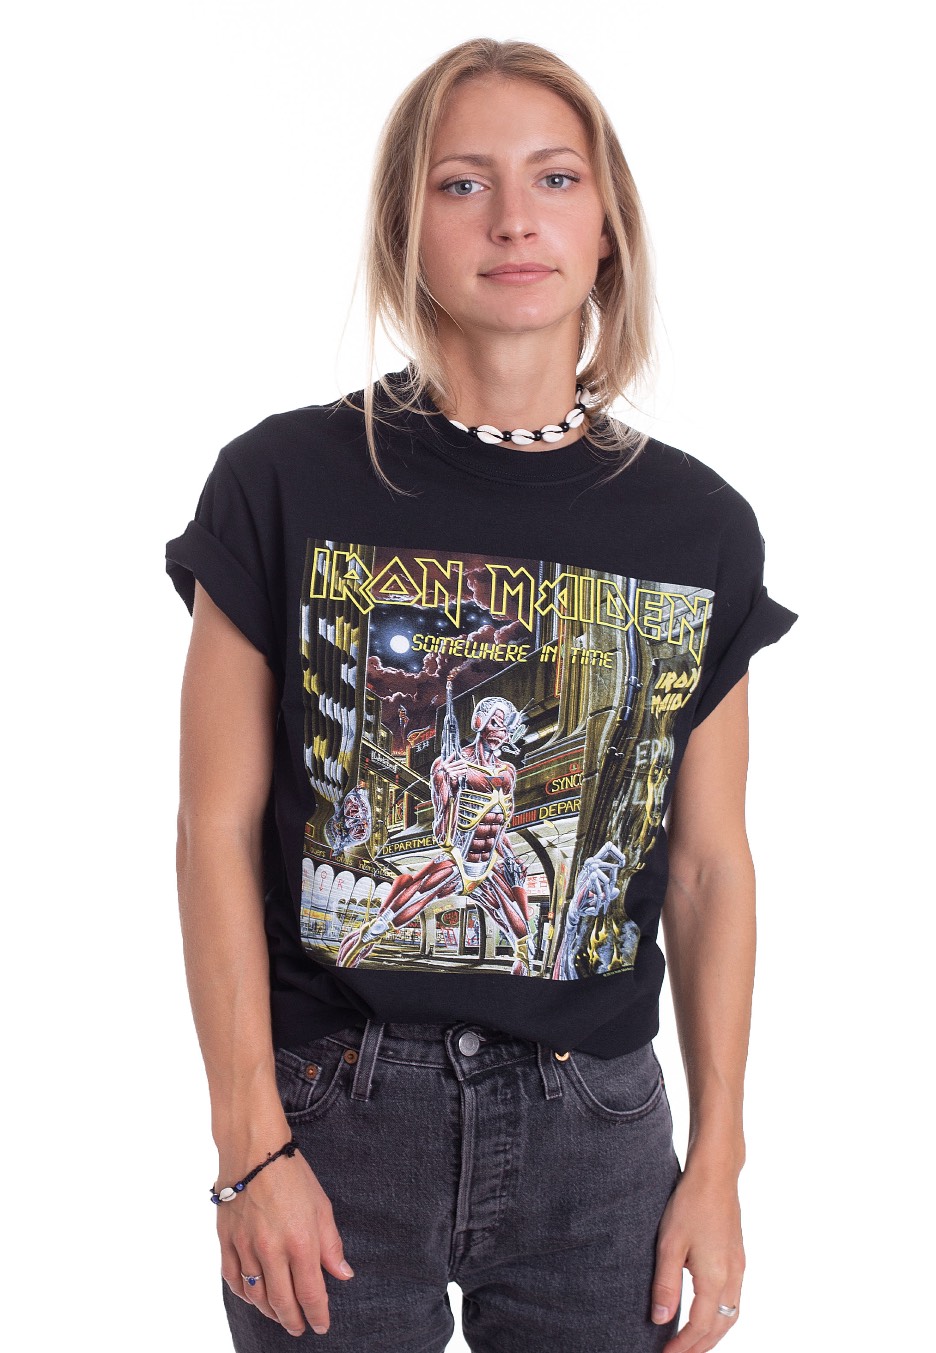 Iron Maiden - Somewhere In Time Box - - T-Shirts